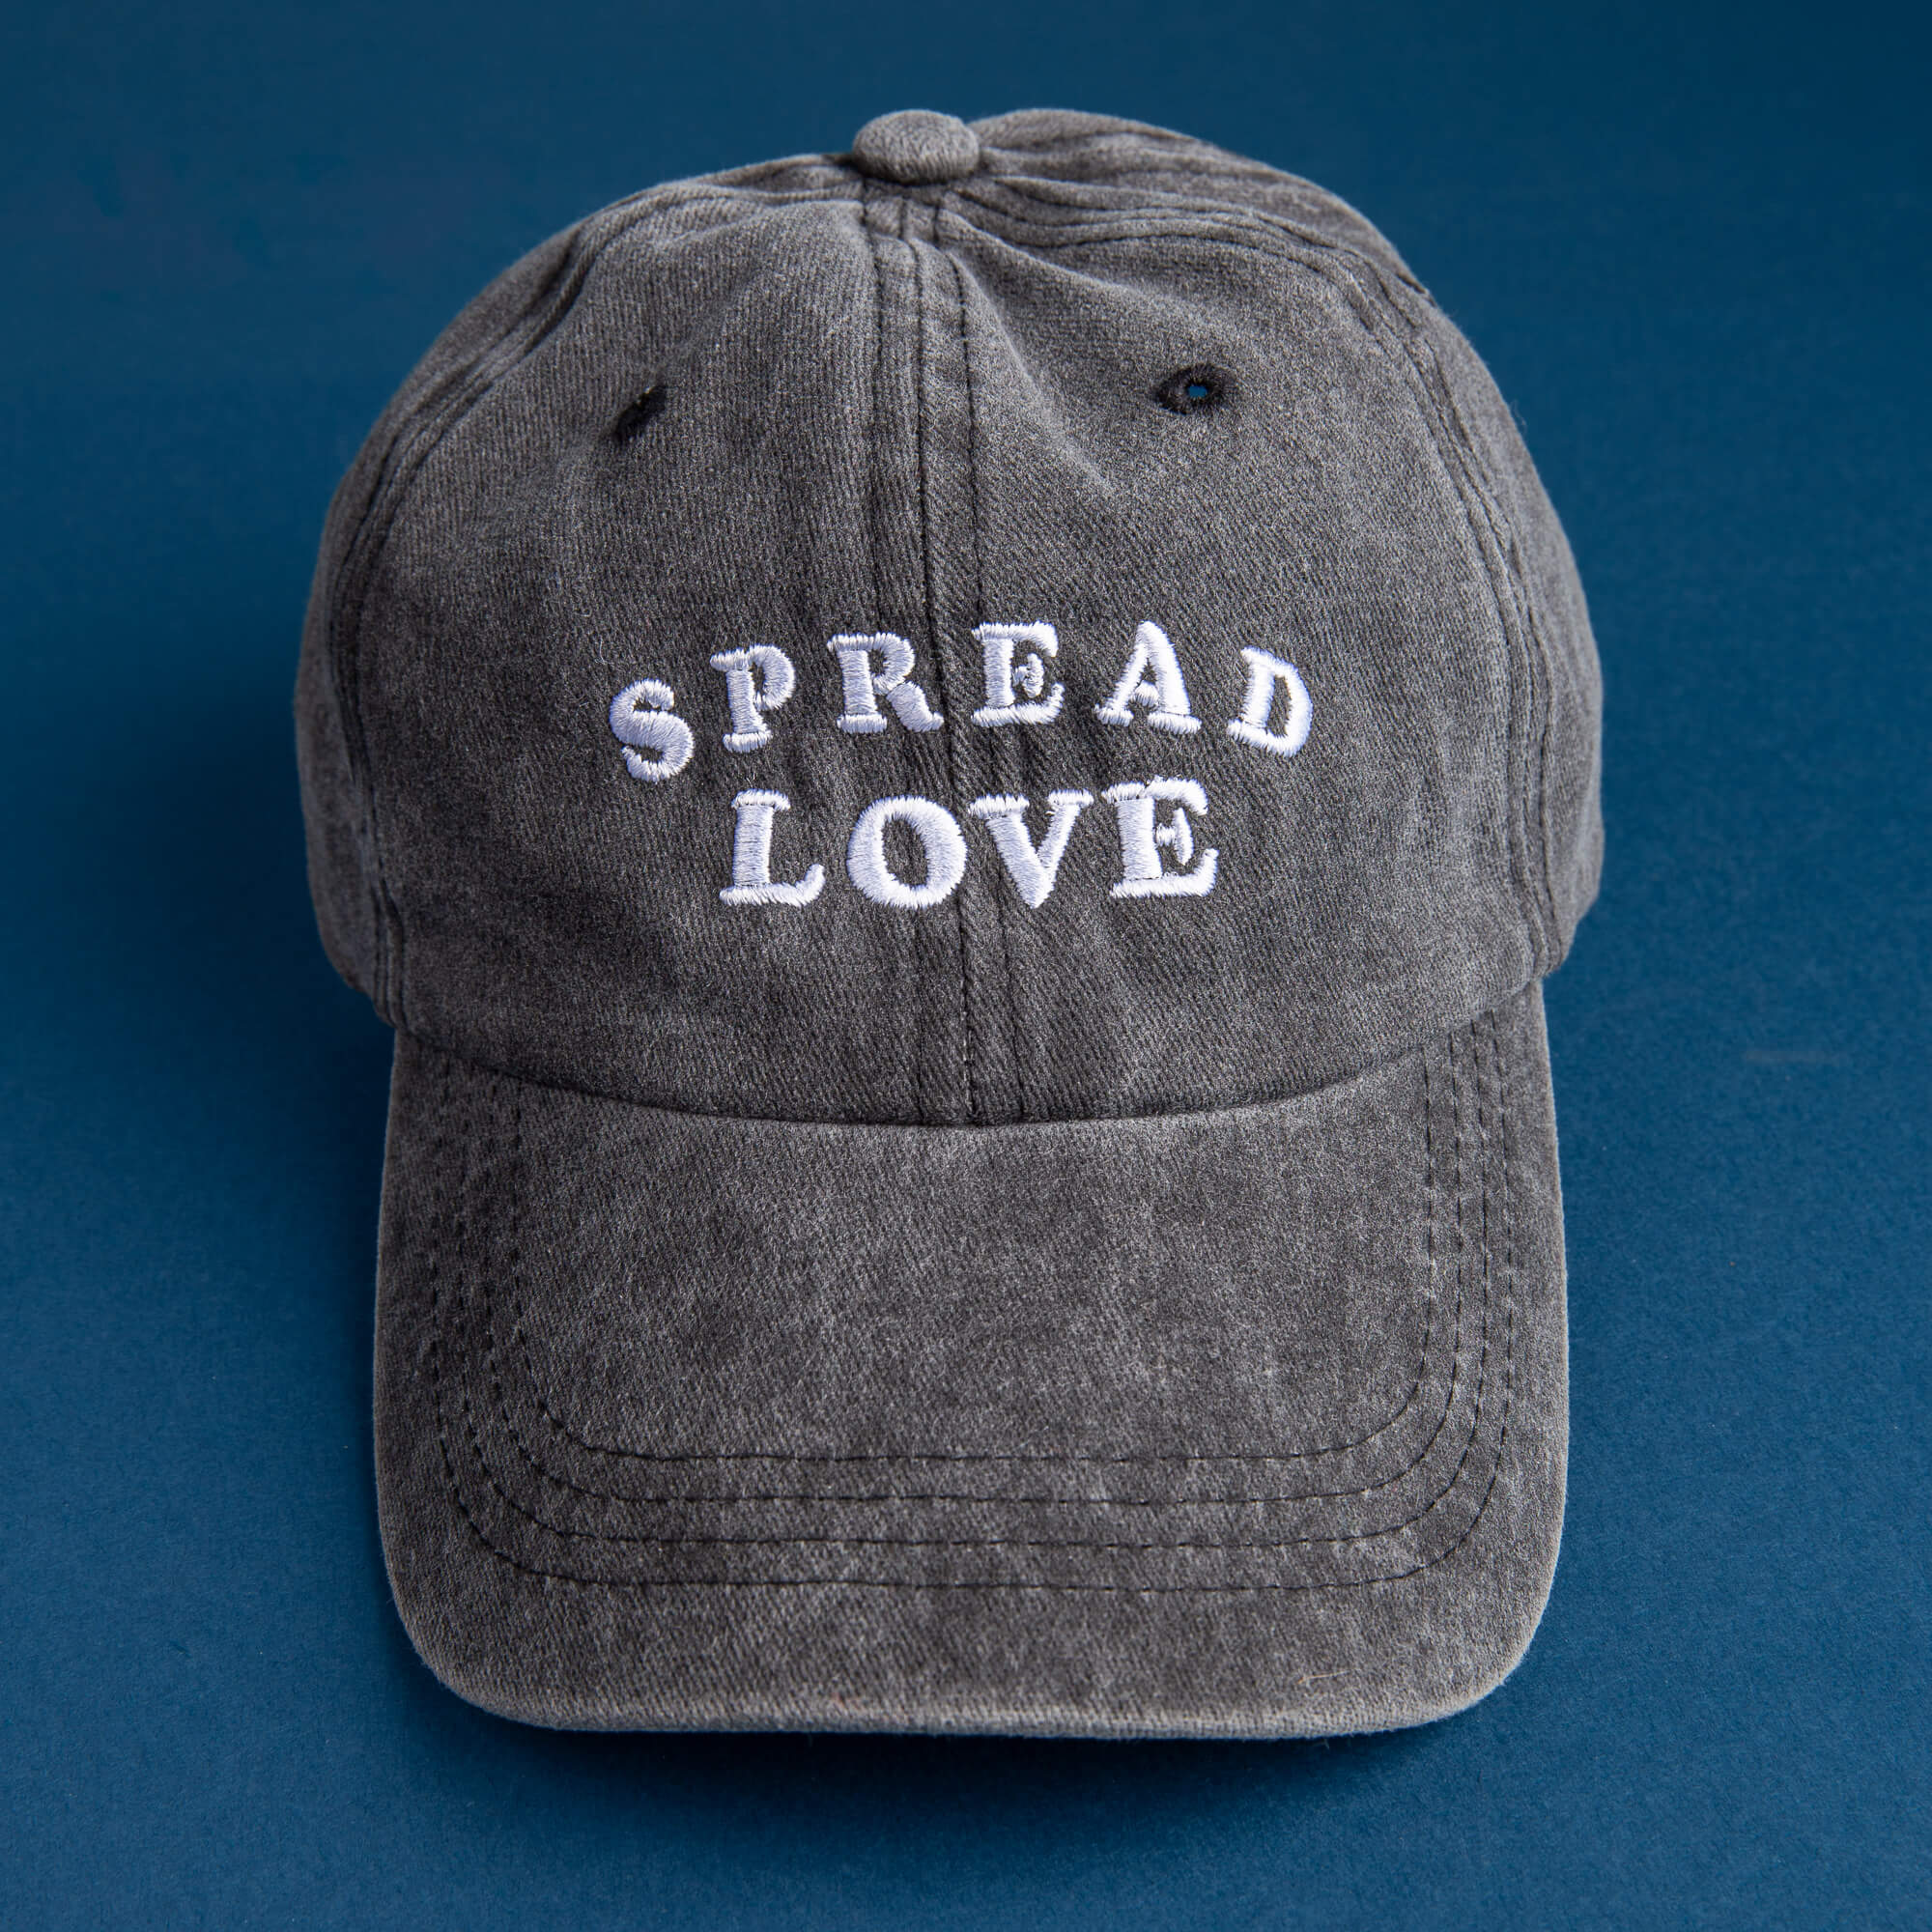 "Spread Love" Adult Hat